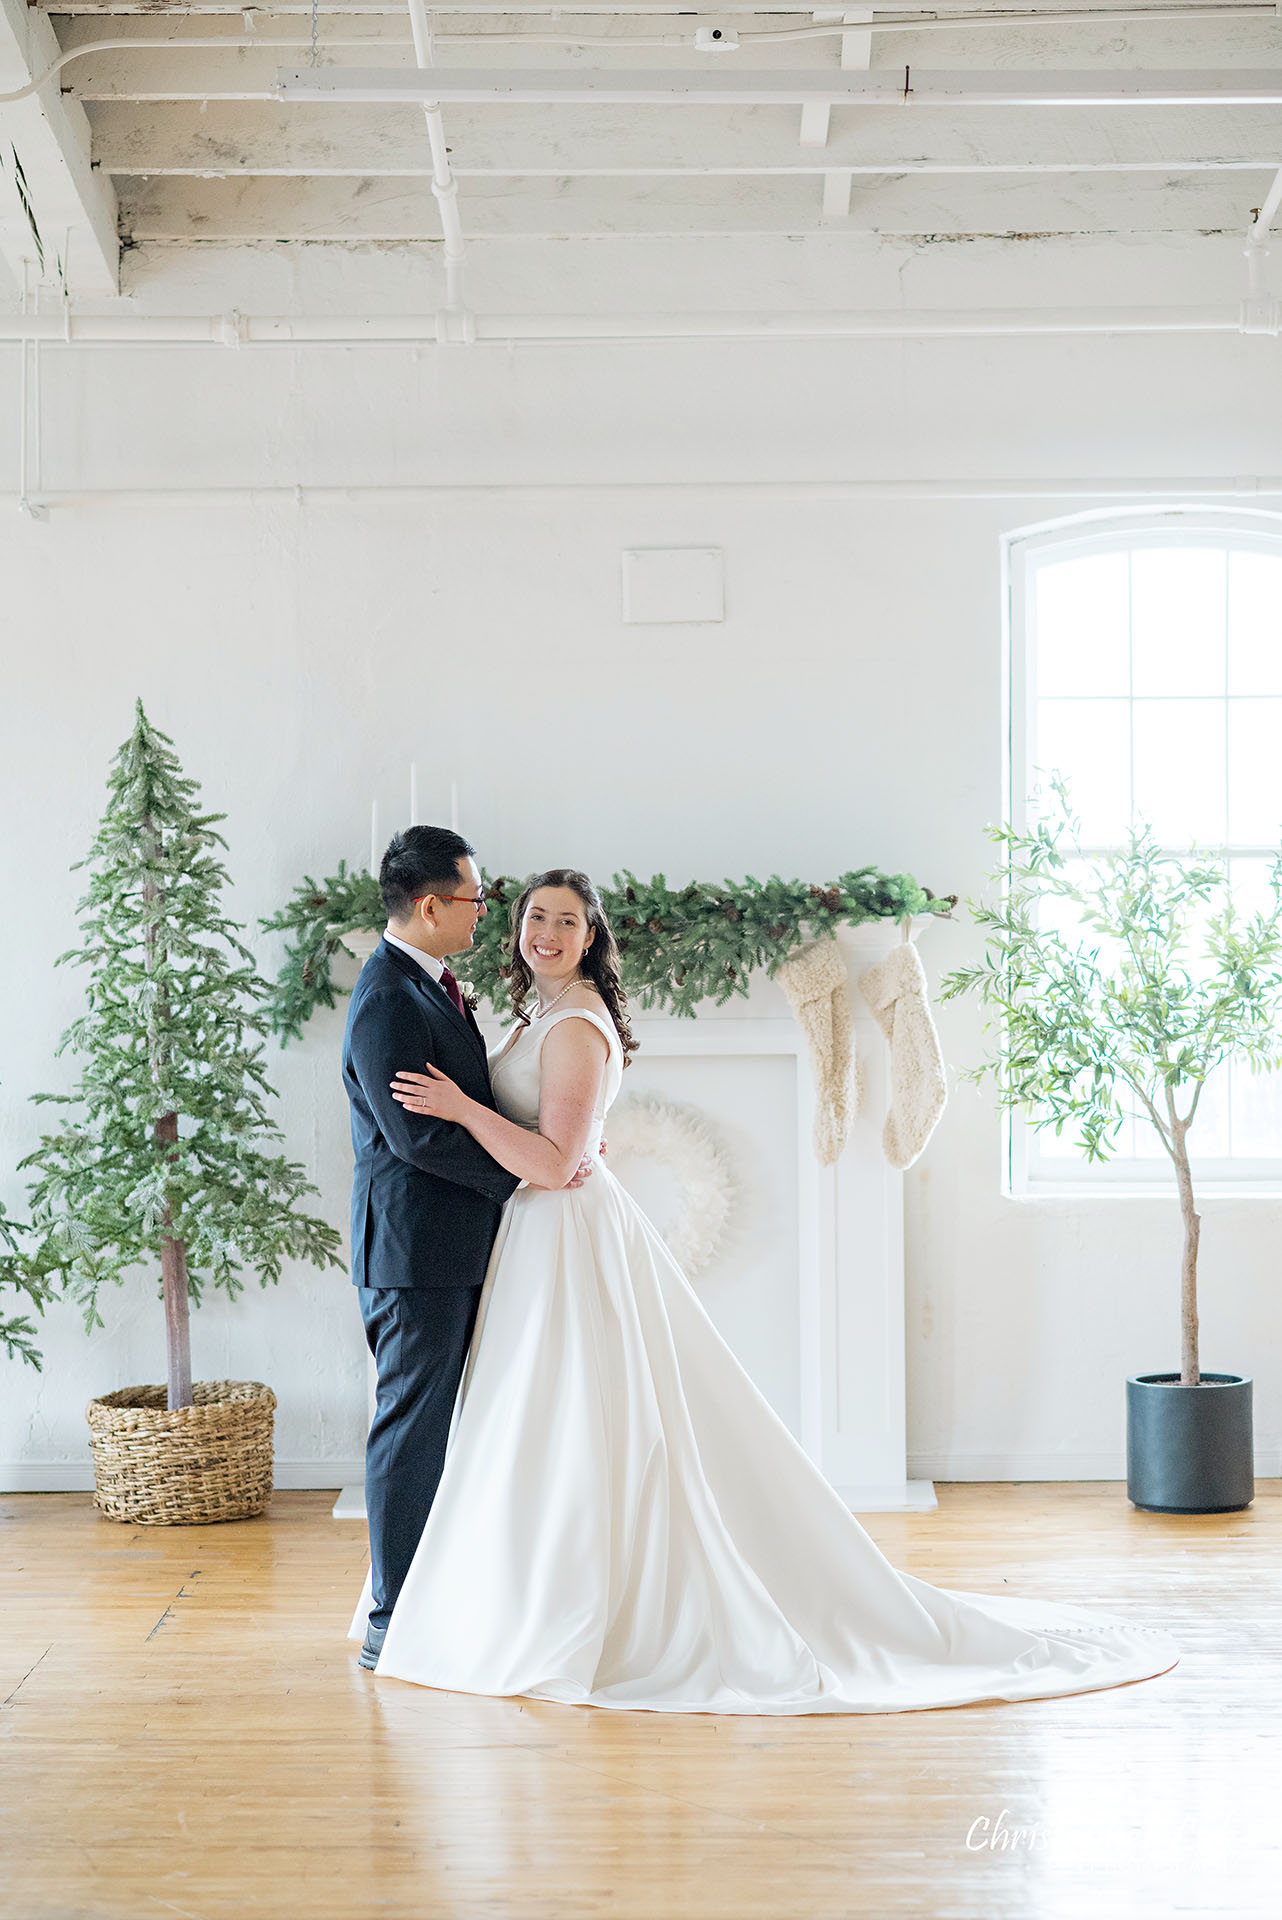 Bride Groom Vintage White Loft Studio Kitchener Waterloo Winter Christmas Natural Candid Photojournalistic Happy Smile Hug Hold Each Other Portrait Bridal Gown Dress Train 